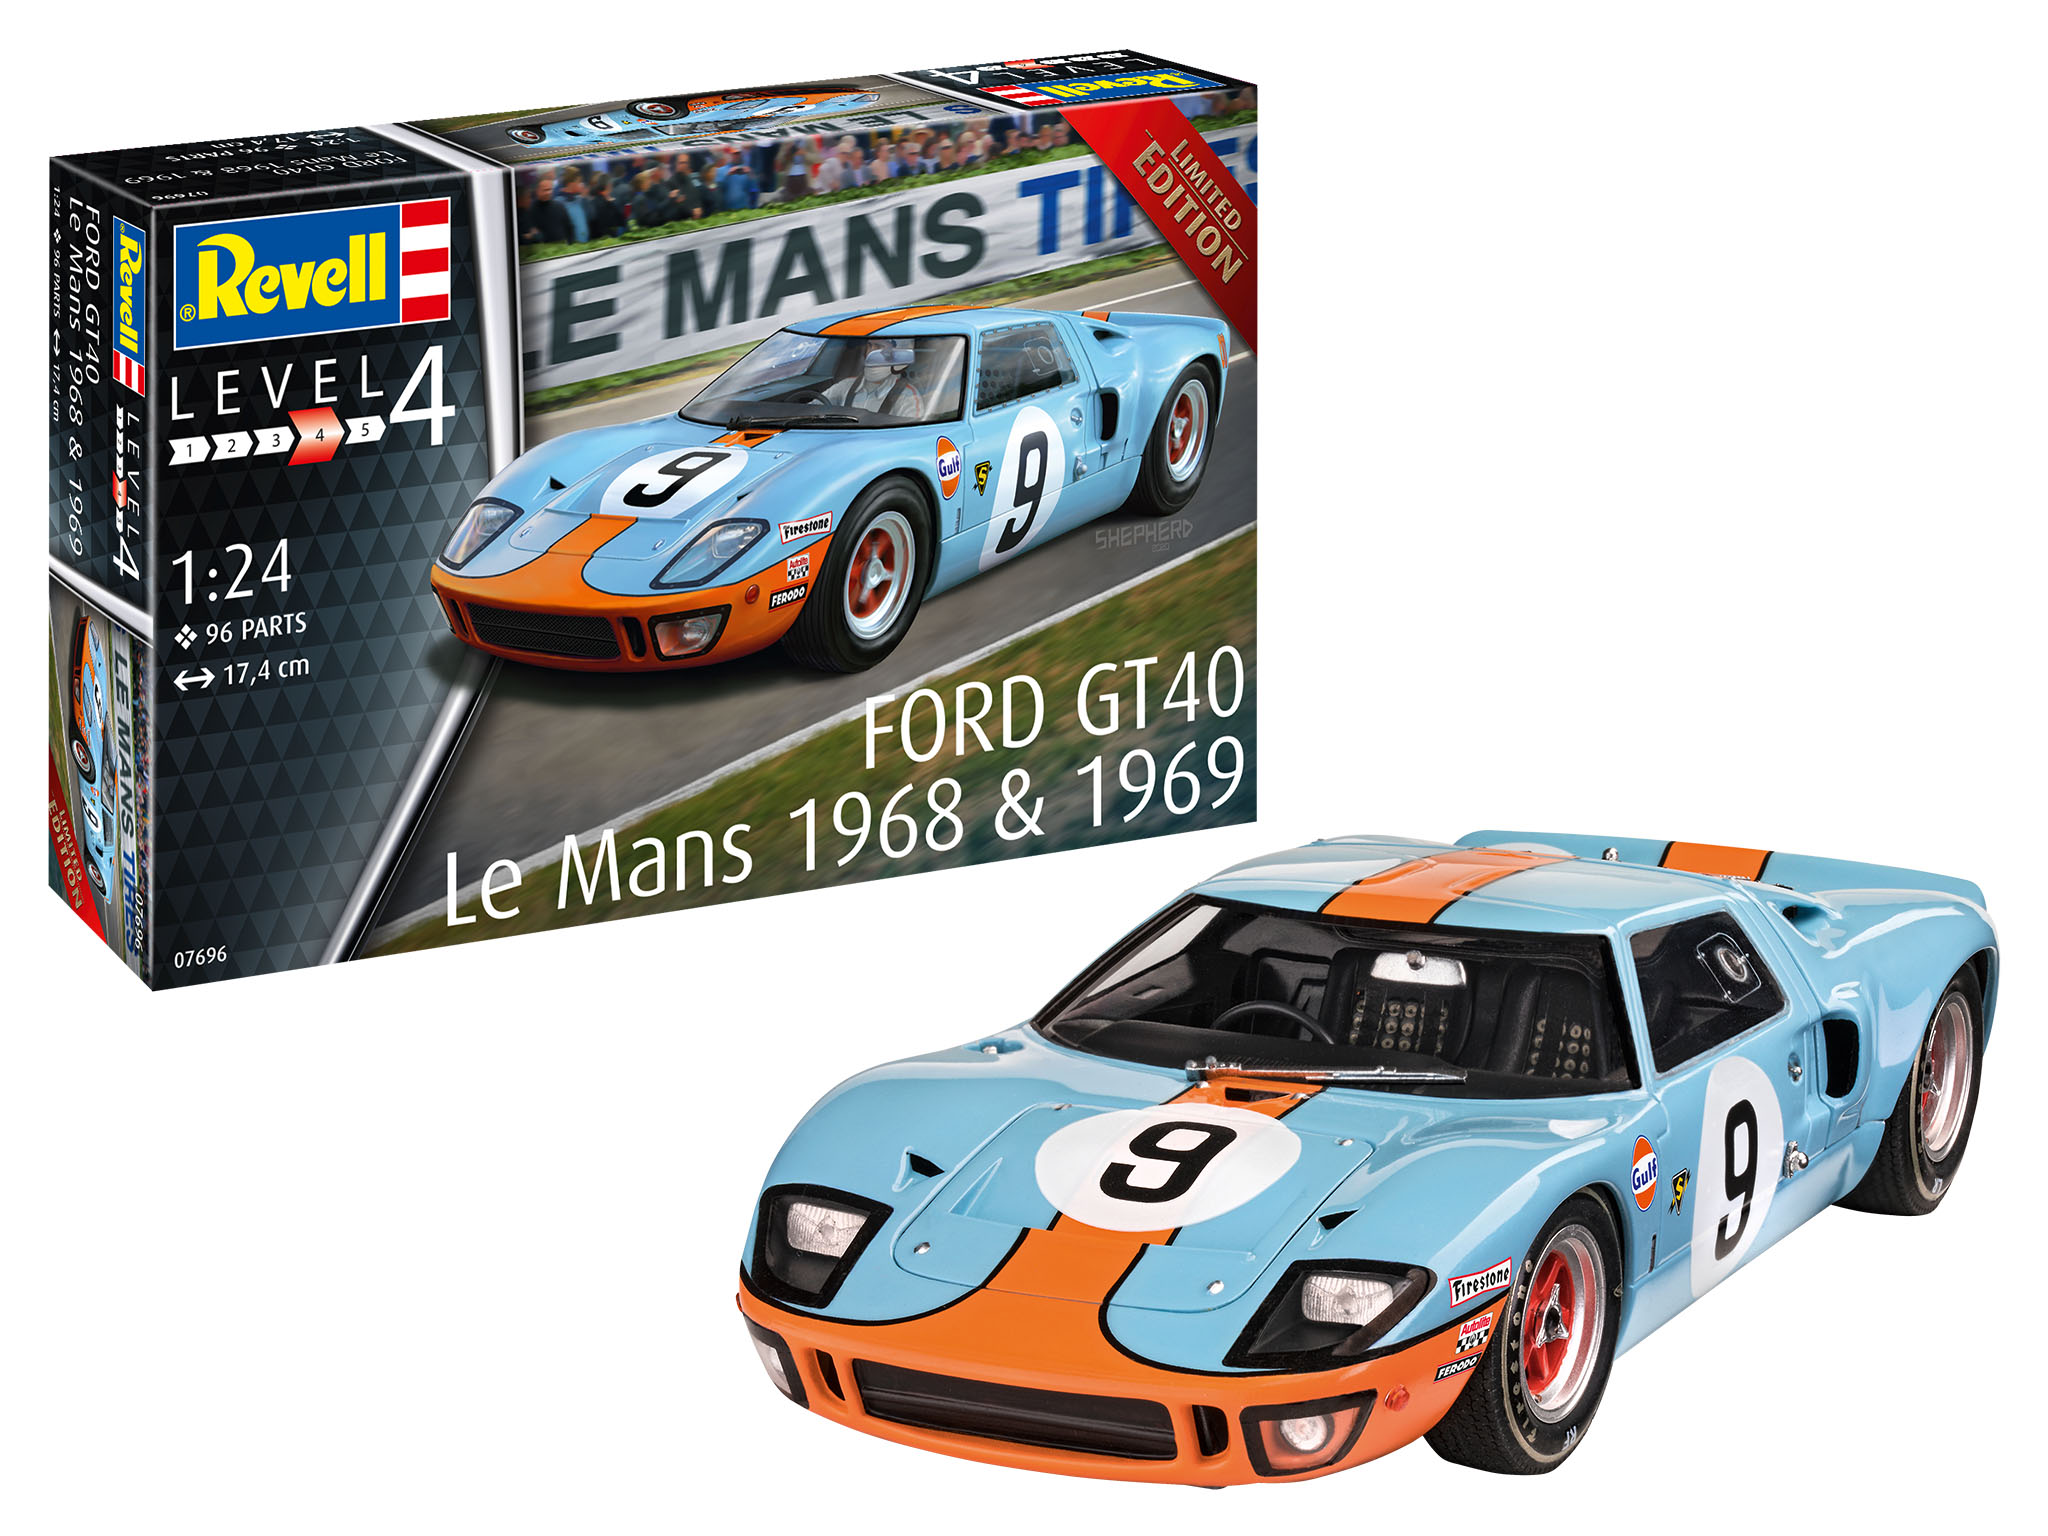 Ford GT 40 Le Mans 1968 & 196